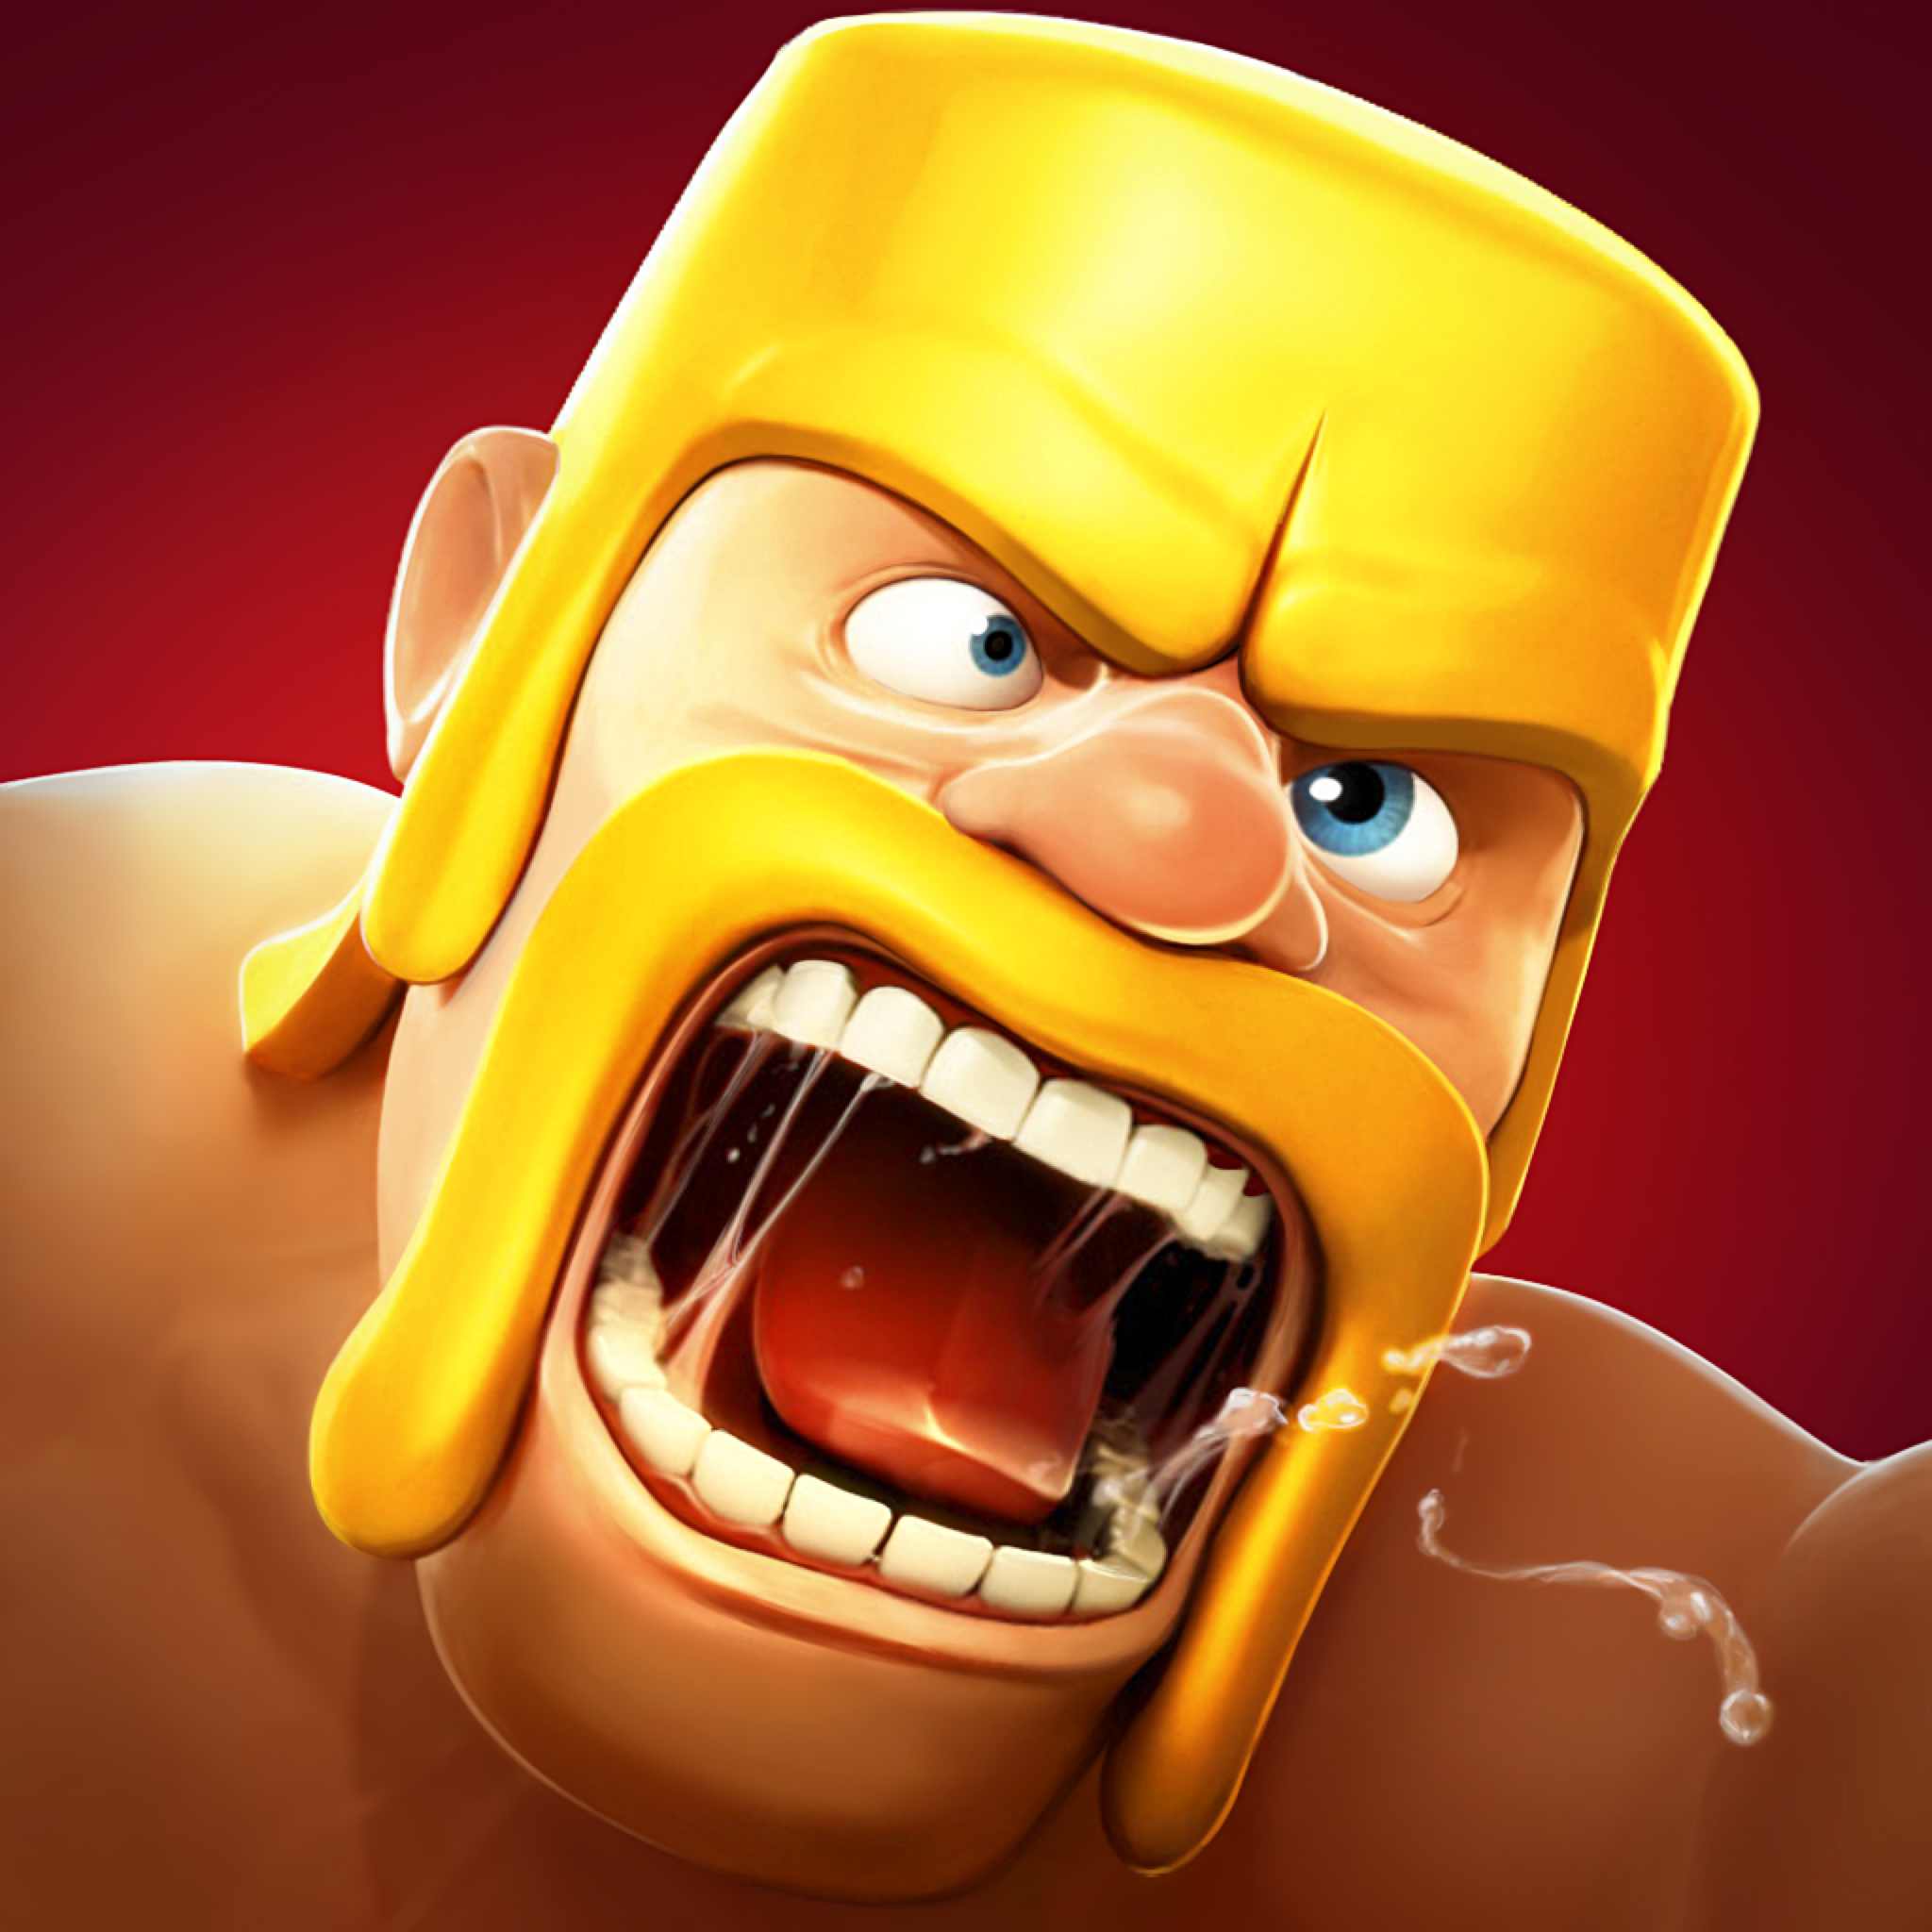 Download Wallpaper Coc - Clash Of Clans App Icon , HD Wallpaper & Backgrounds